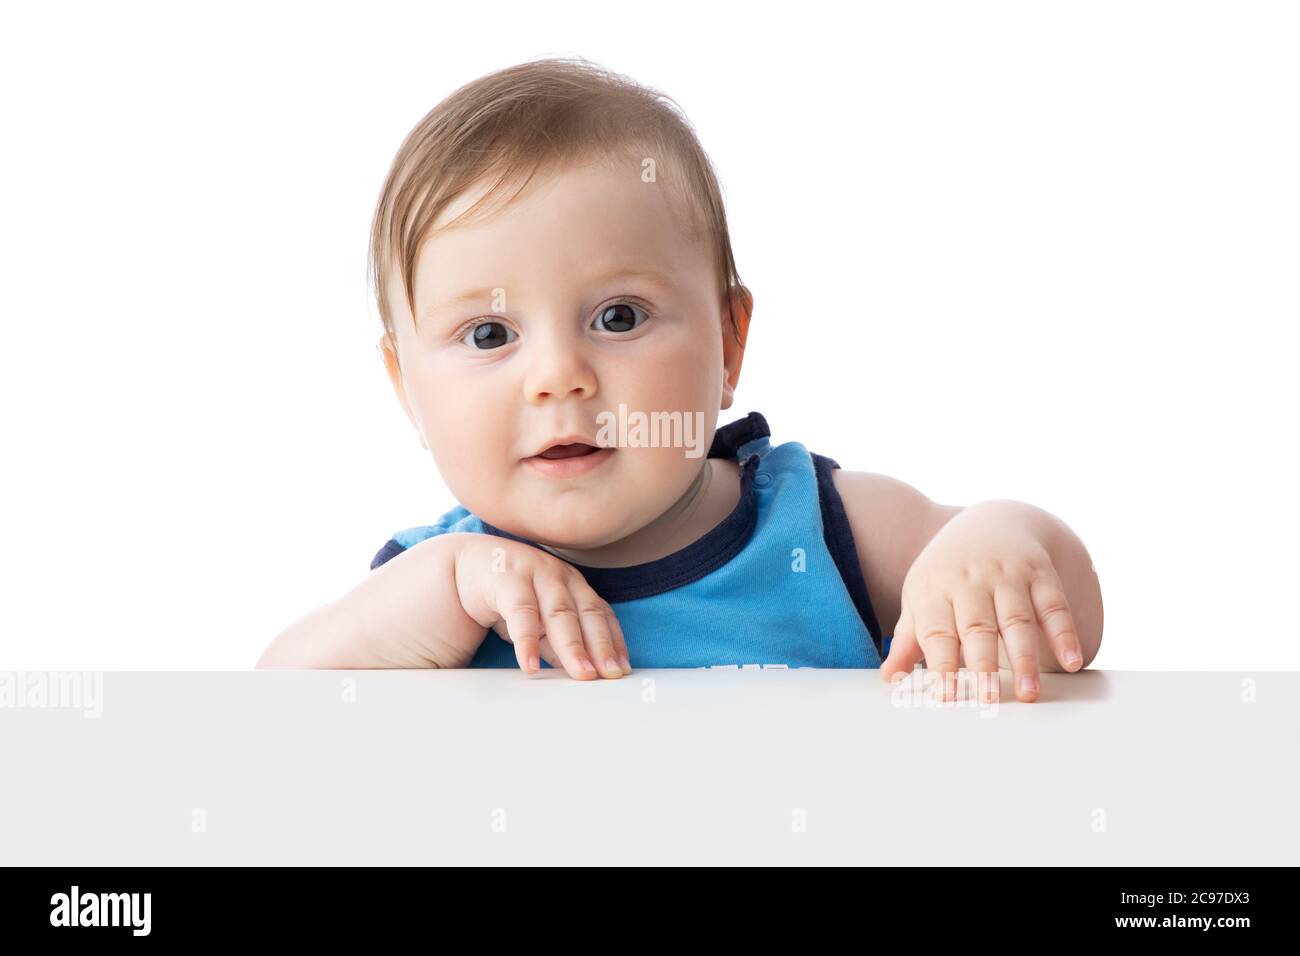 Cute baby boy looking surprised. 5 months baby ready to play games with toys. Stock Photo